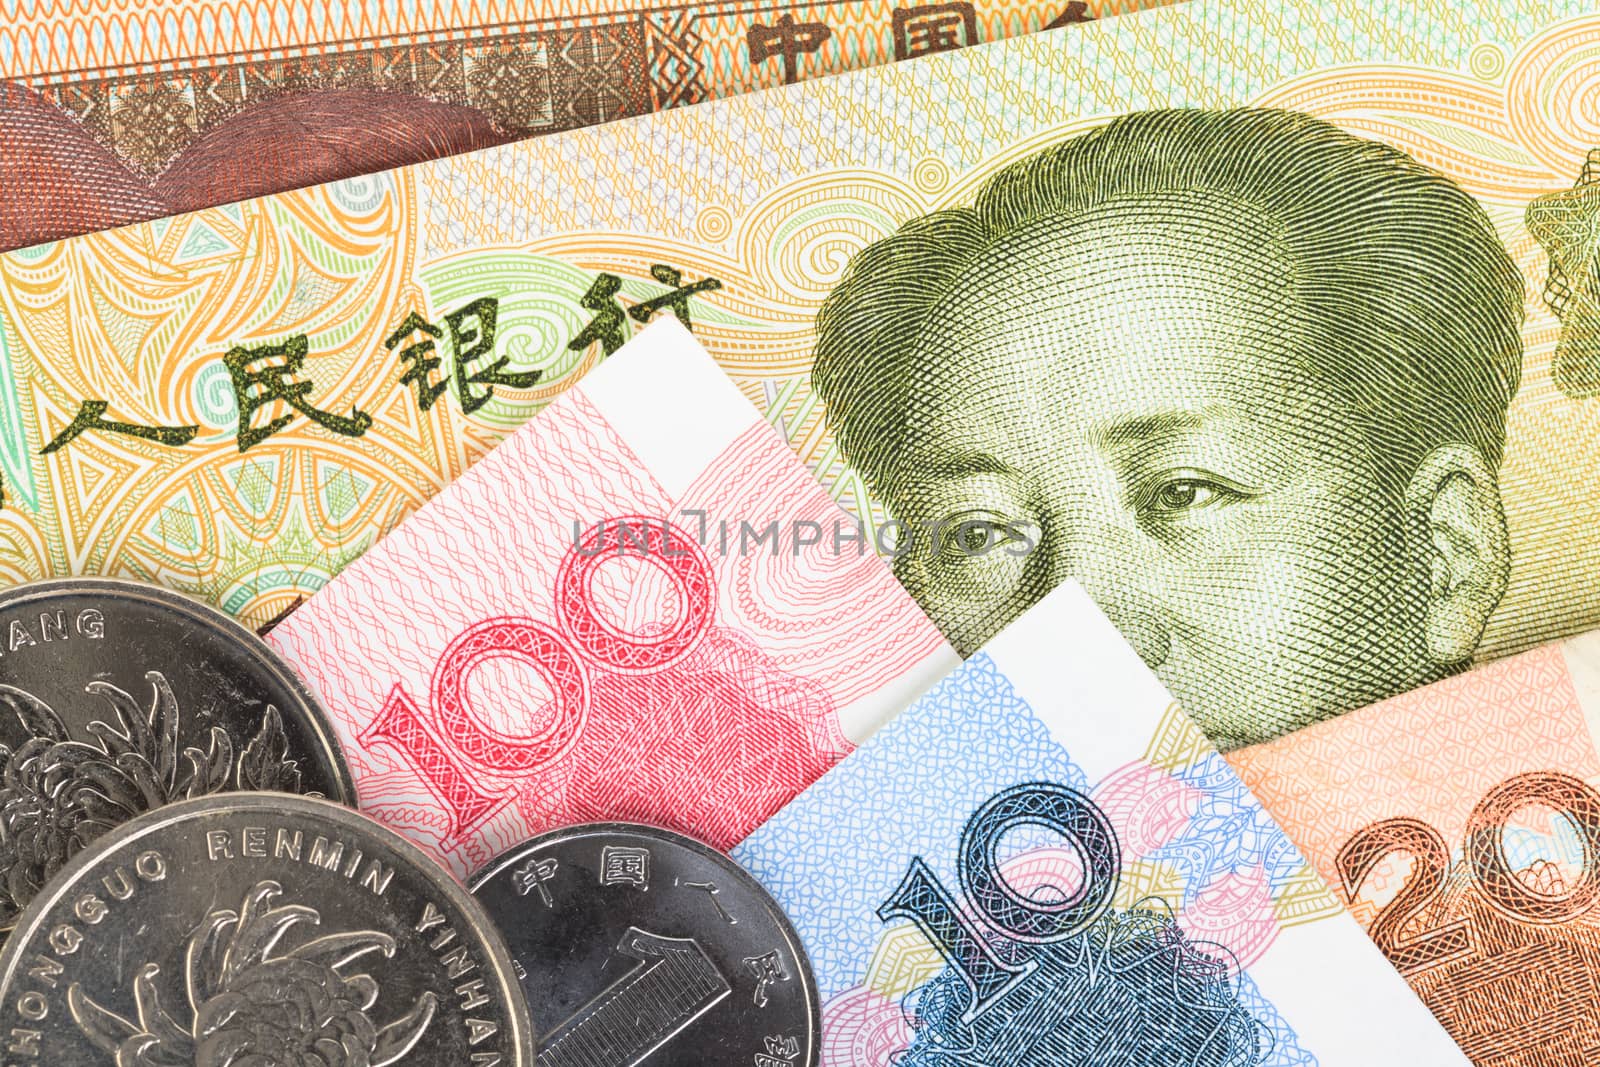 Chinese or Yuan banknotes money and coins from China's currency, close up view as background